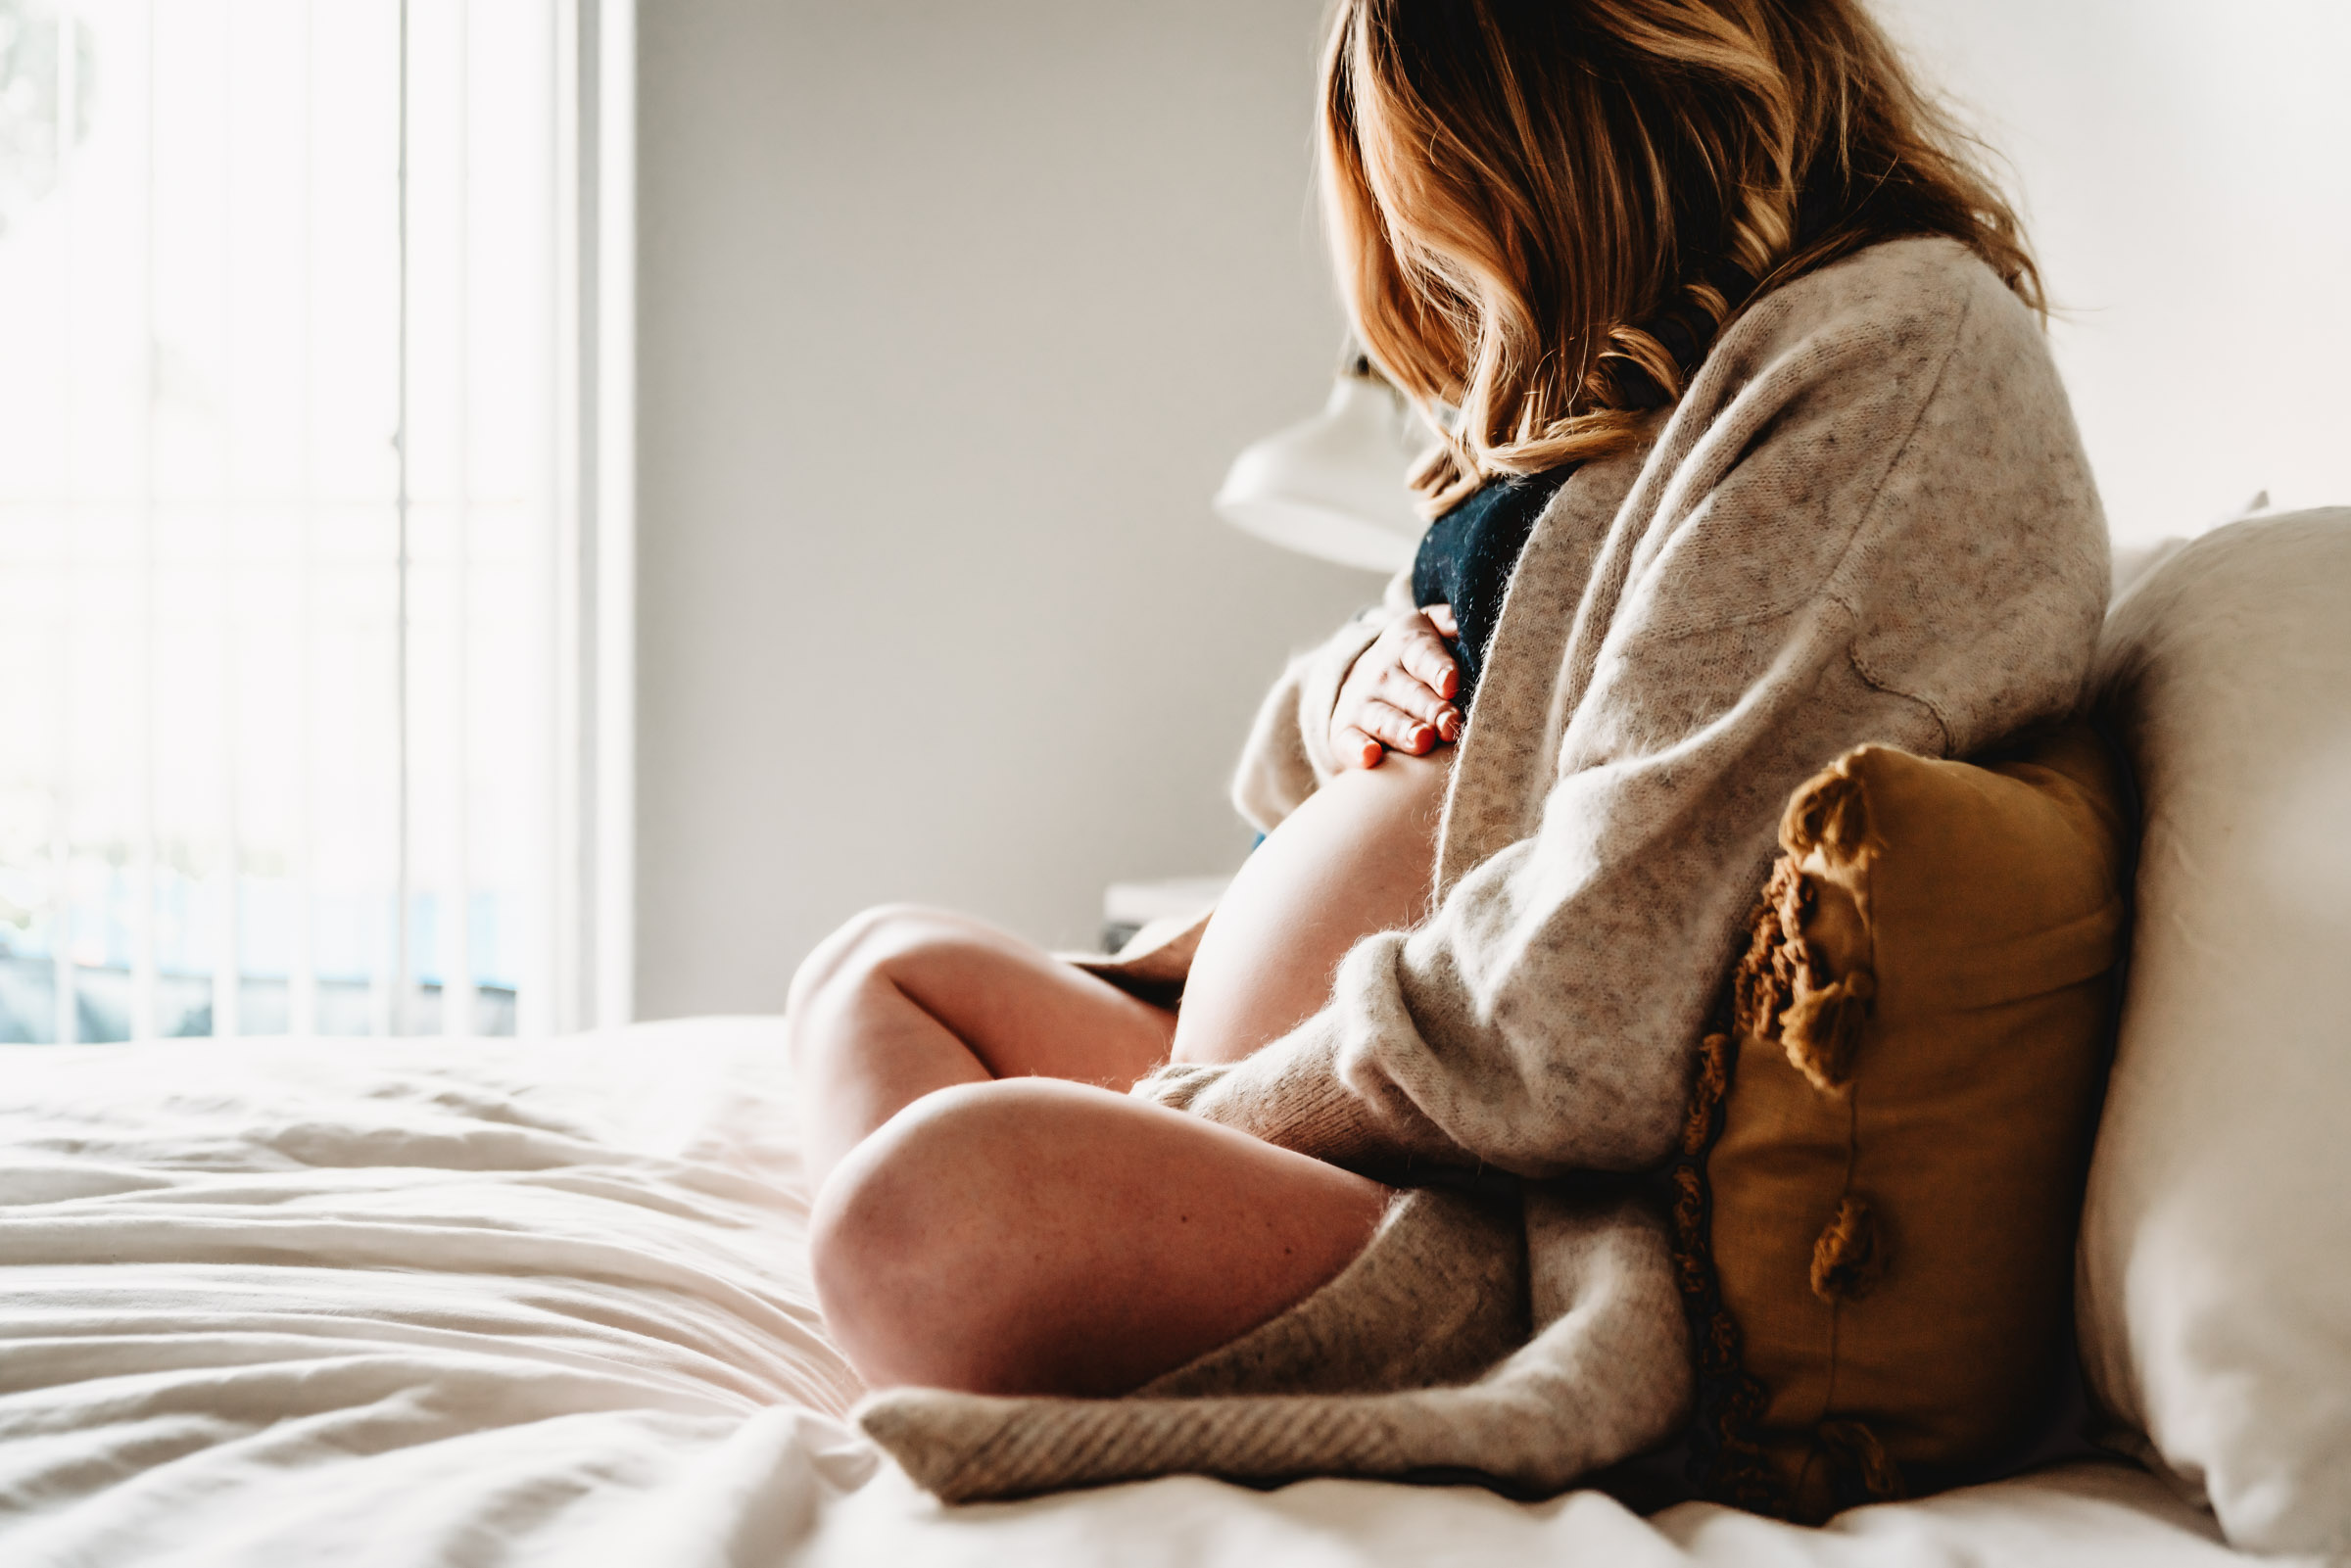 A pregnant woman sitting on her bed looking at and holding her belly during a San Diego lifestyle in-home maternity session by Love Michelle Photography.